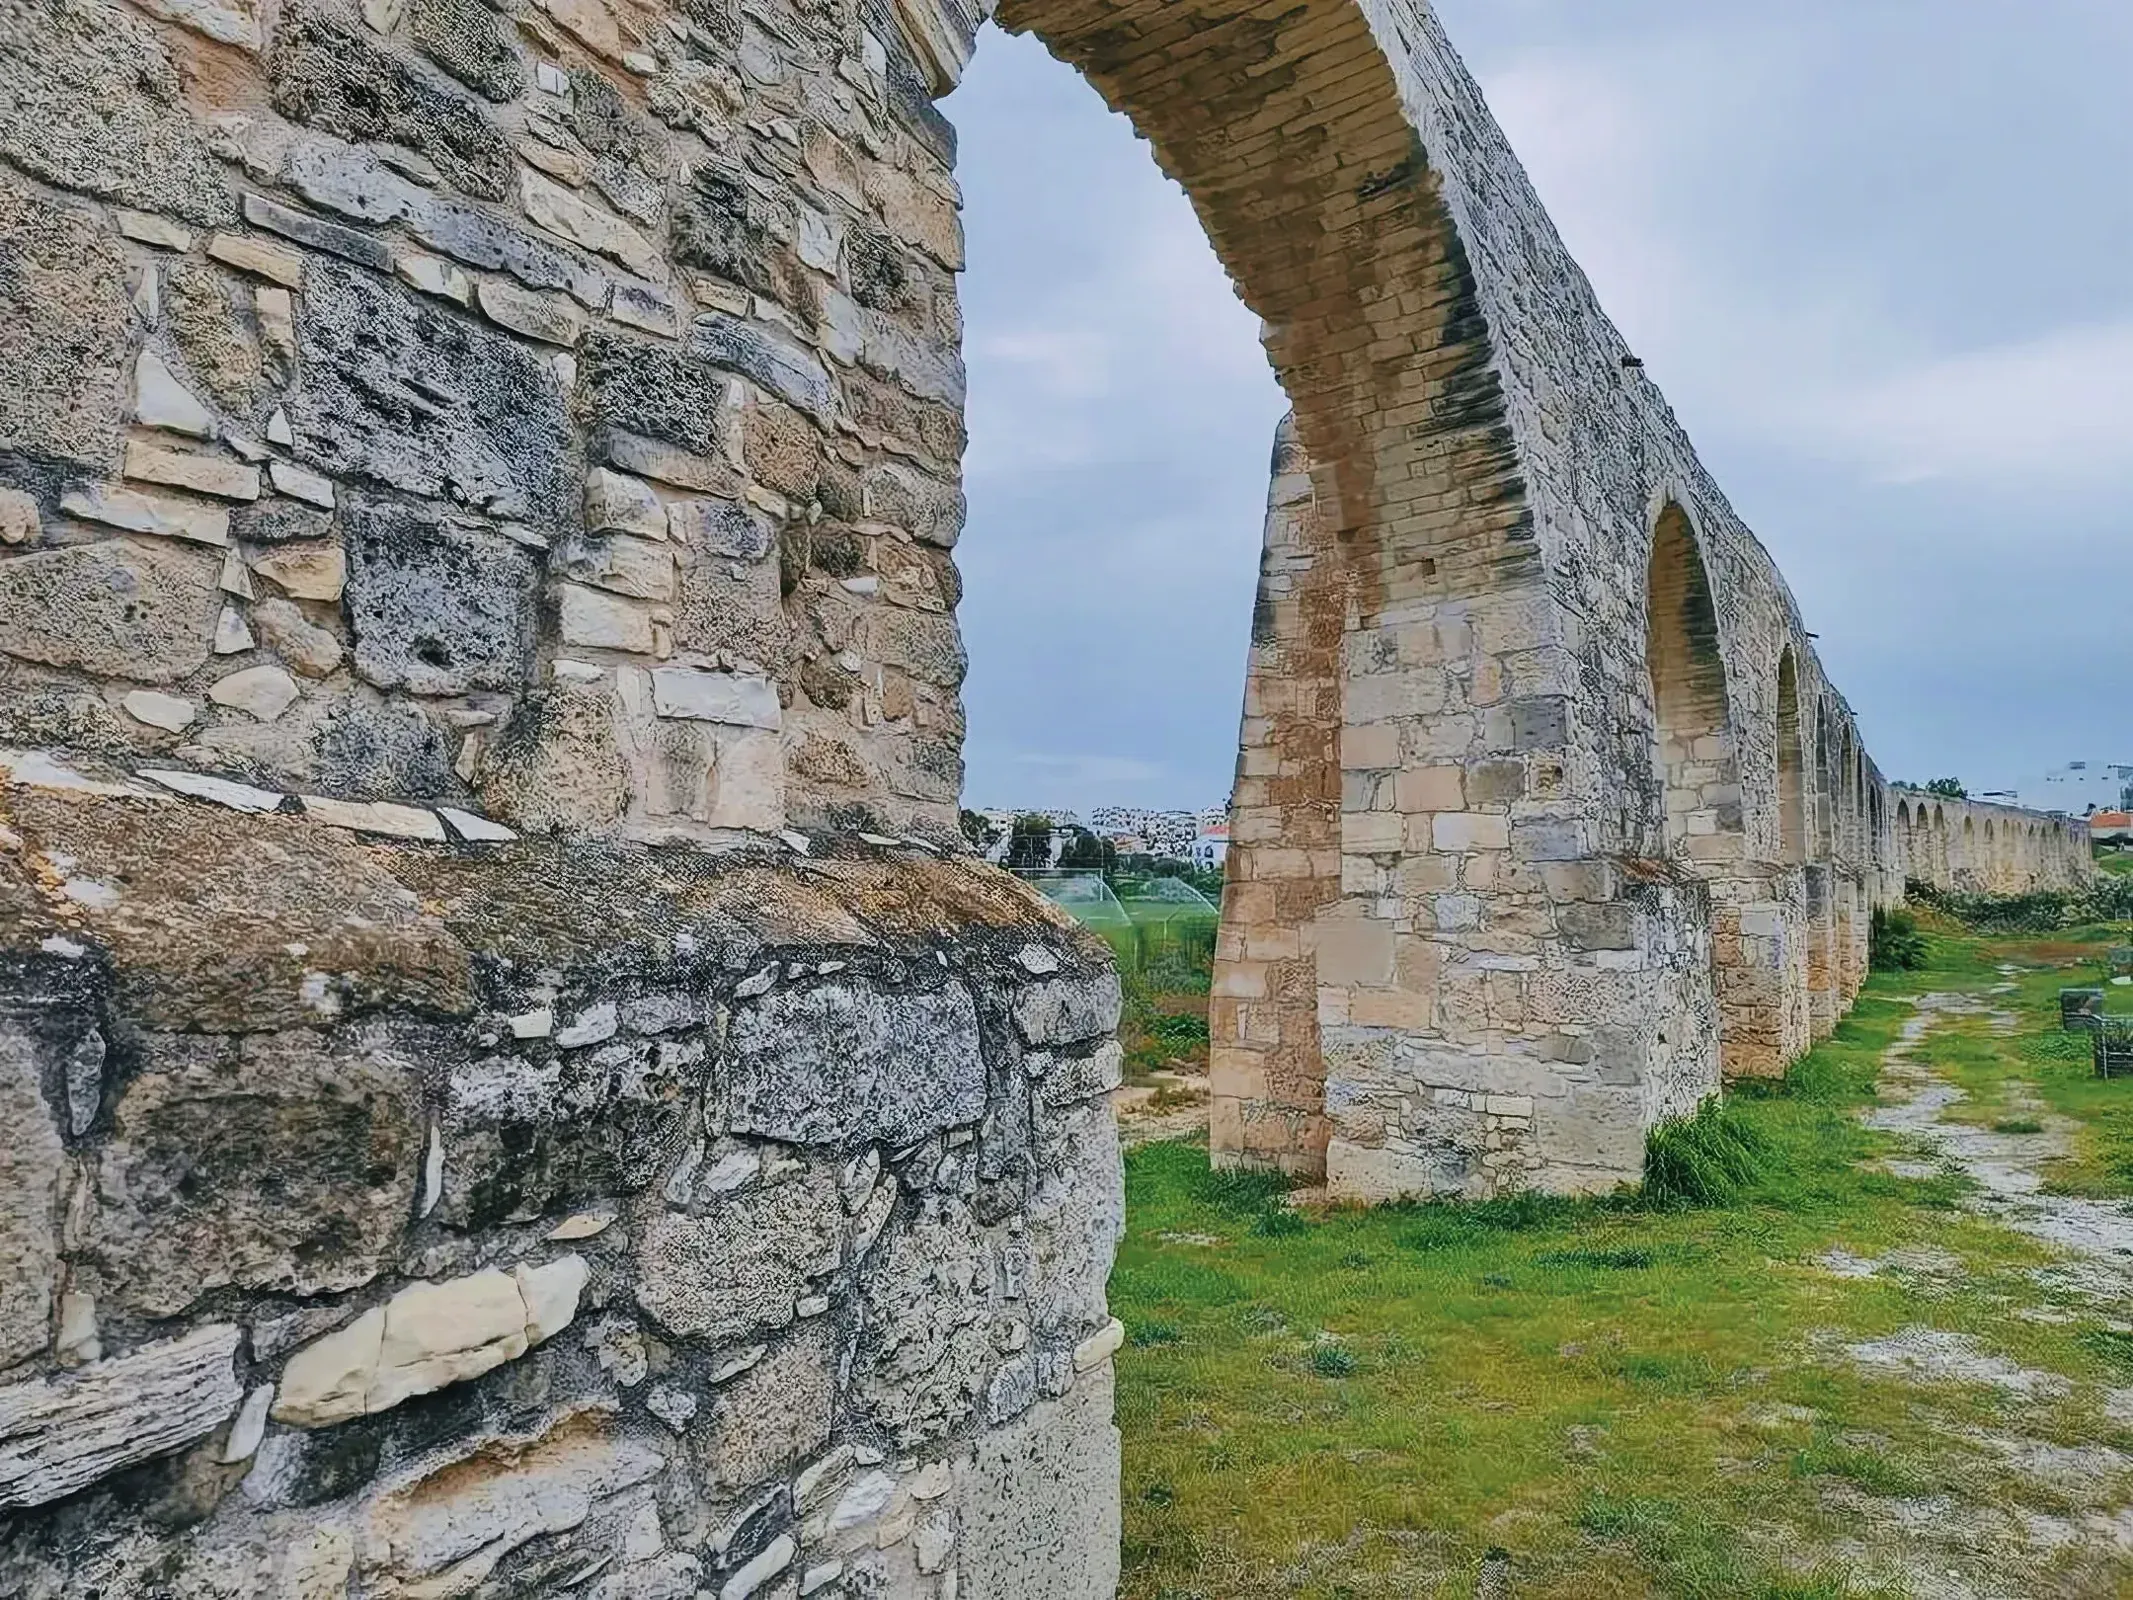 Stone archways of the Kamares Aqueduct in Larnaca, Cyprus.